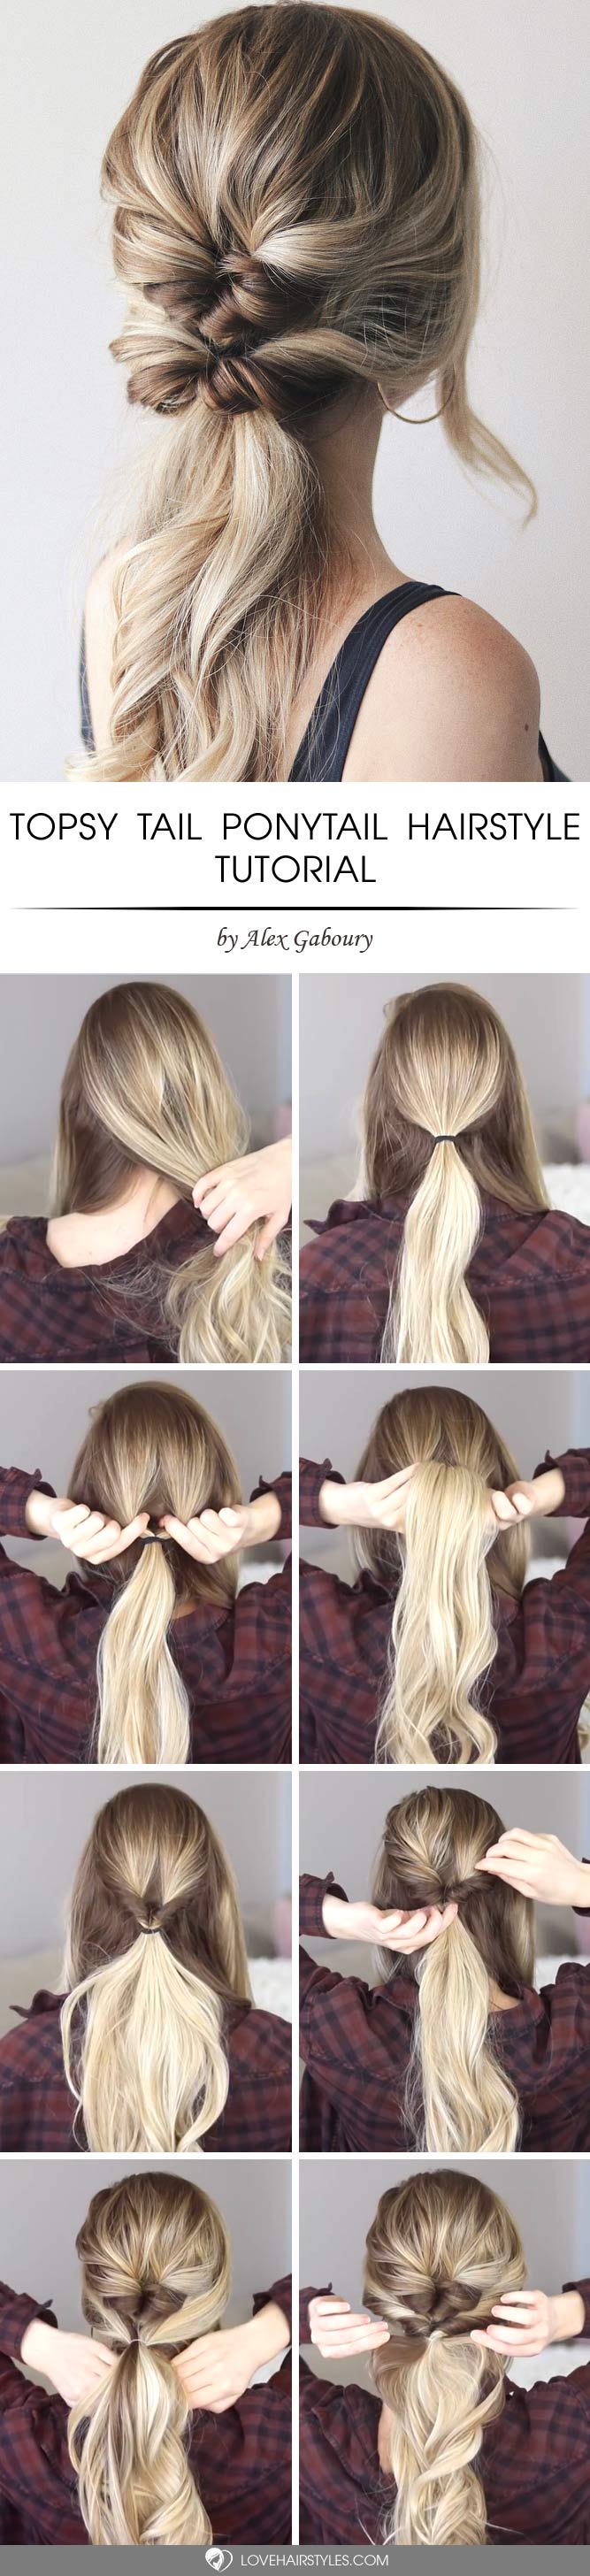 25 Handy Tutorials On How To Get Topsy Tail Hairstyles | LoveHairStyles